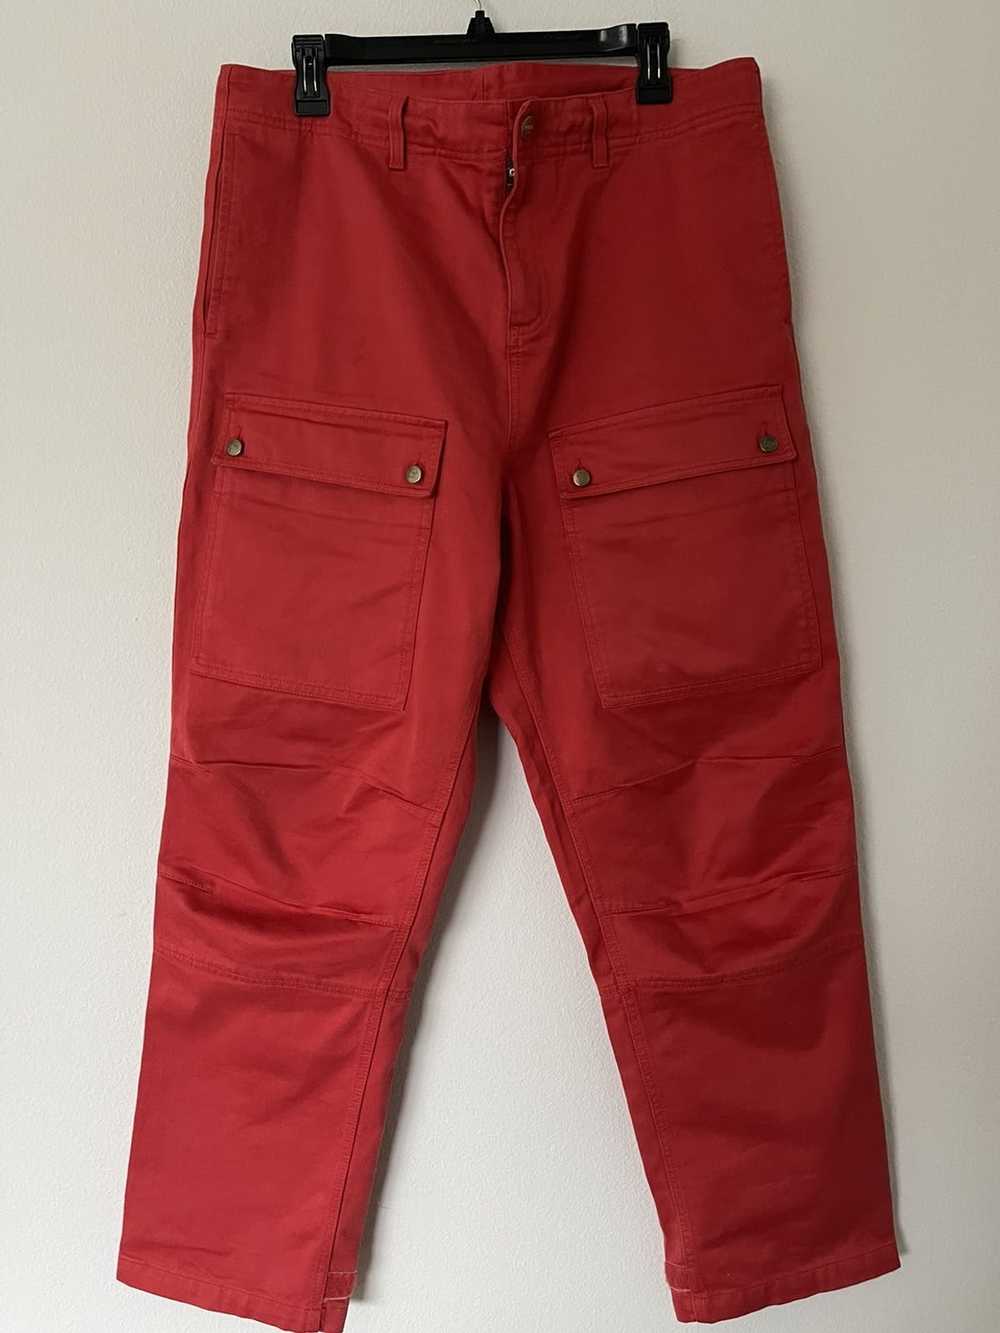 Vyner Articles Almost New, Denim Cargo Pants - image 1